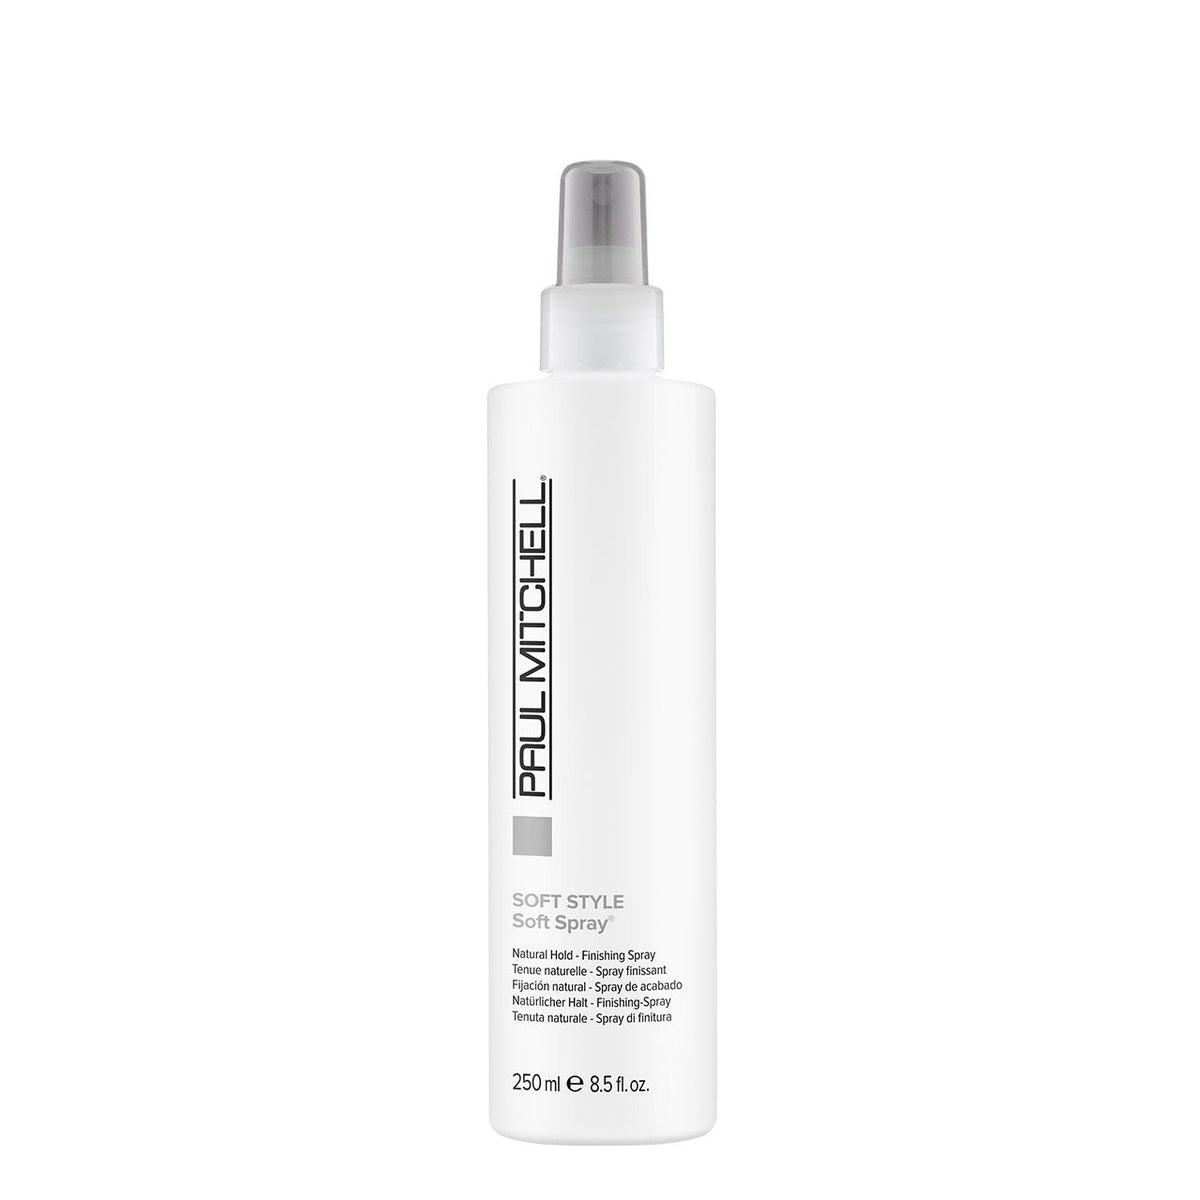 Soft Style Soft Spray Finishing Spray - by Paul Mitchell |ProCare Outlet|